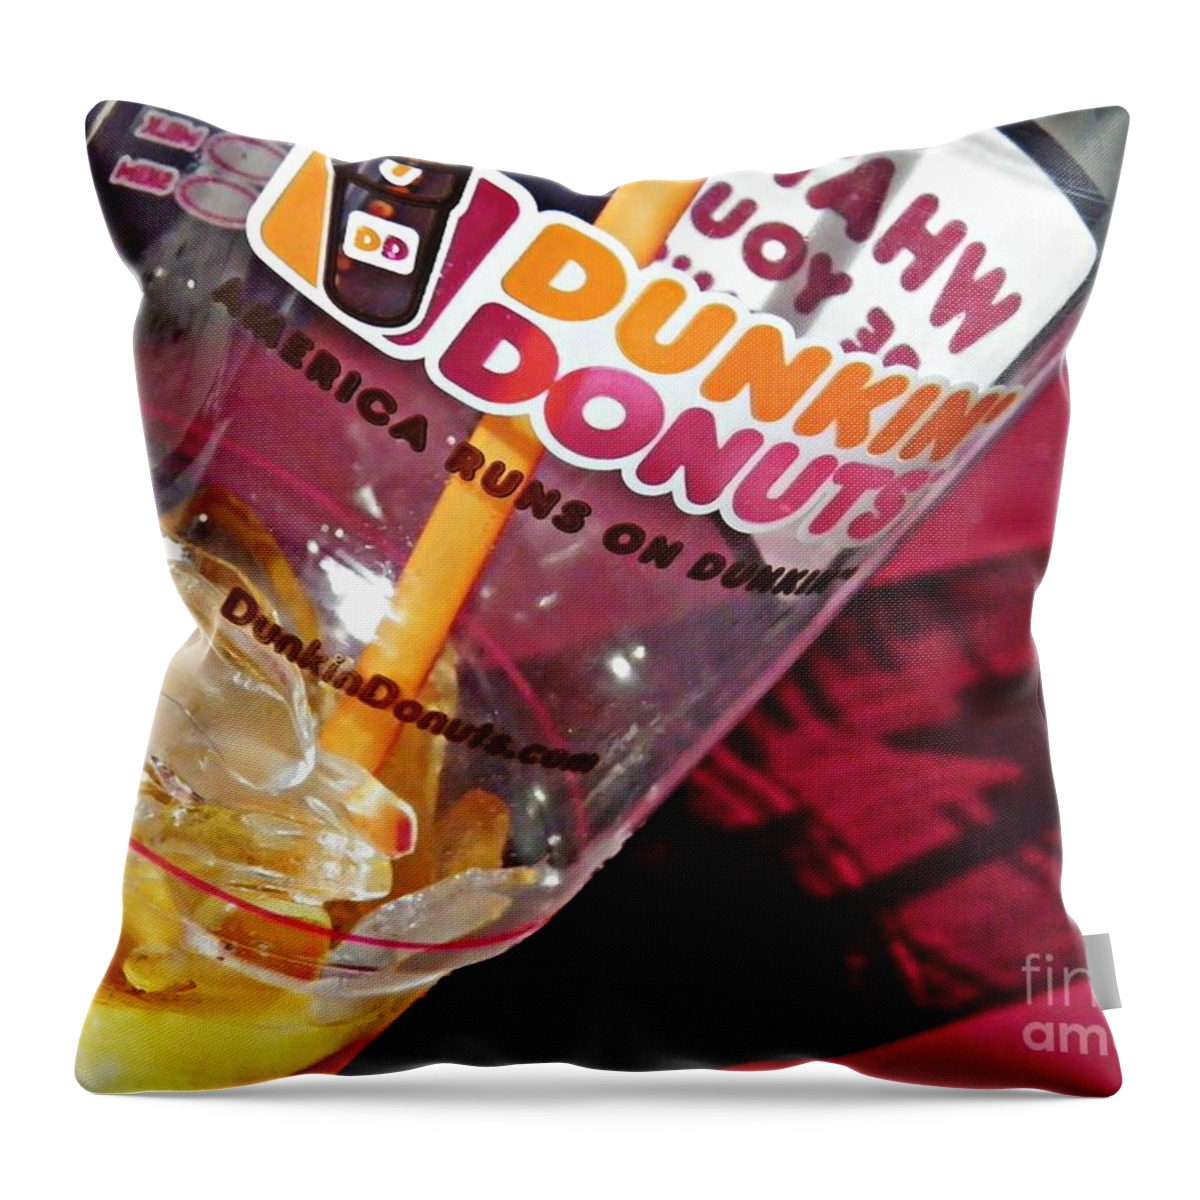 Dunkin Ice Coffee 29 Throw Pillow featuring the photograph Dunkin Ice Coffee 29 by Sarah Loft